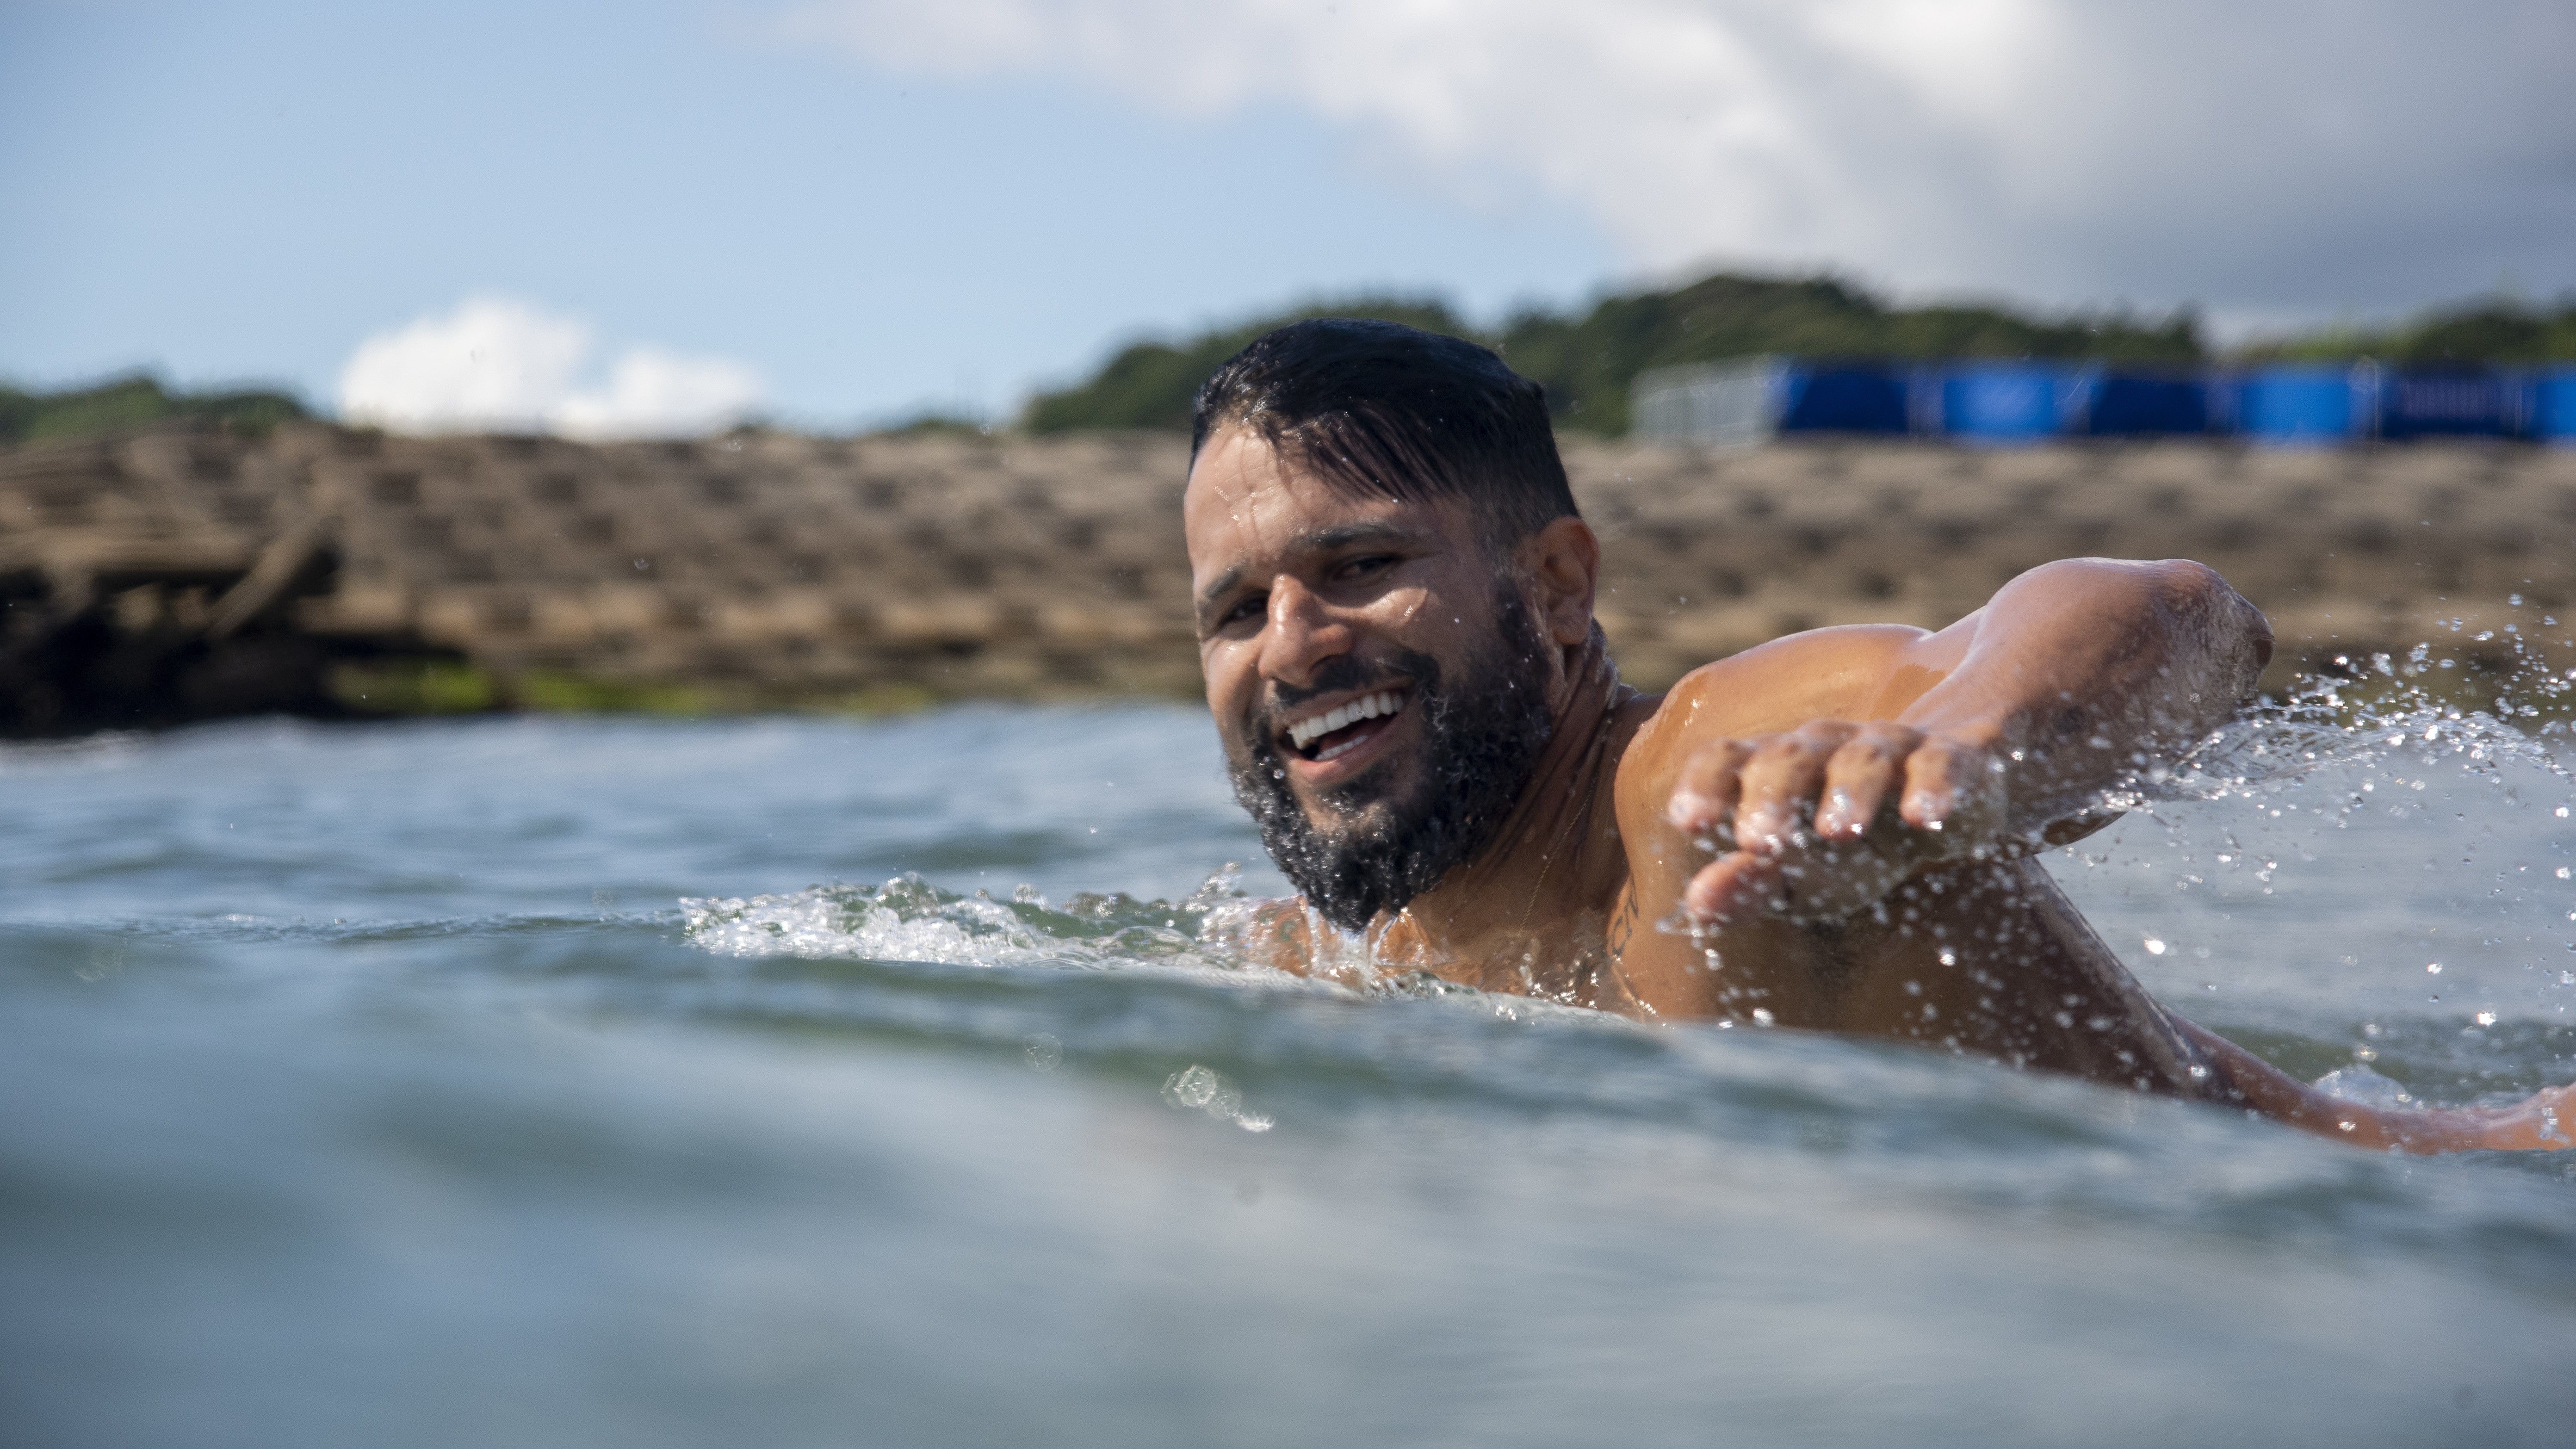 Brazilian surfer Italo Ferreria paddles out to catch a wave as he prepares for the 2020 Tokyo Olympics